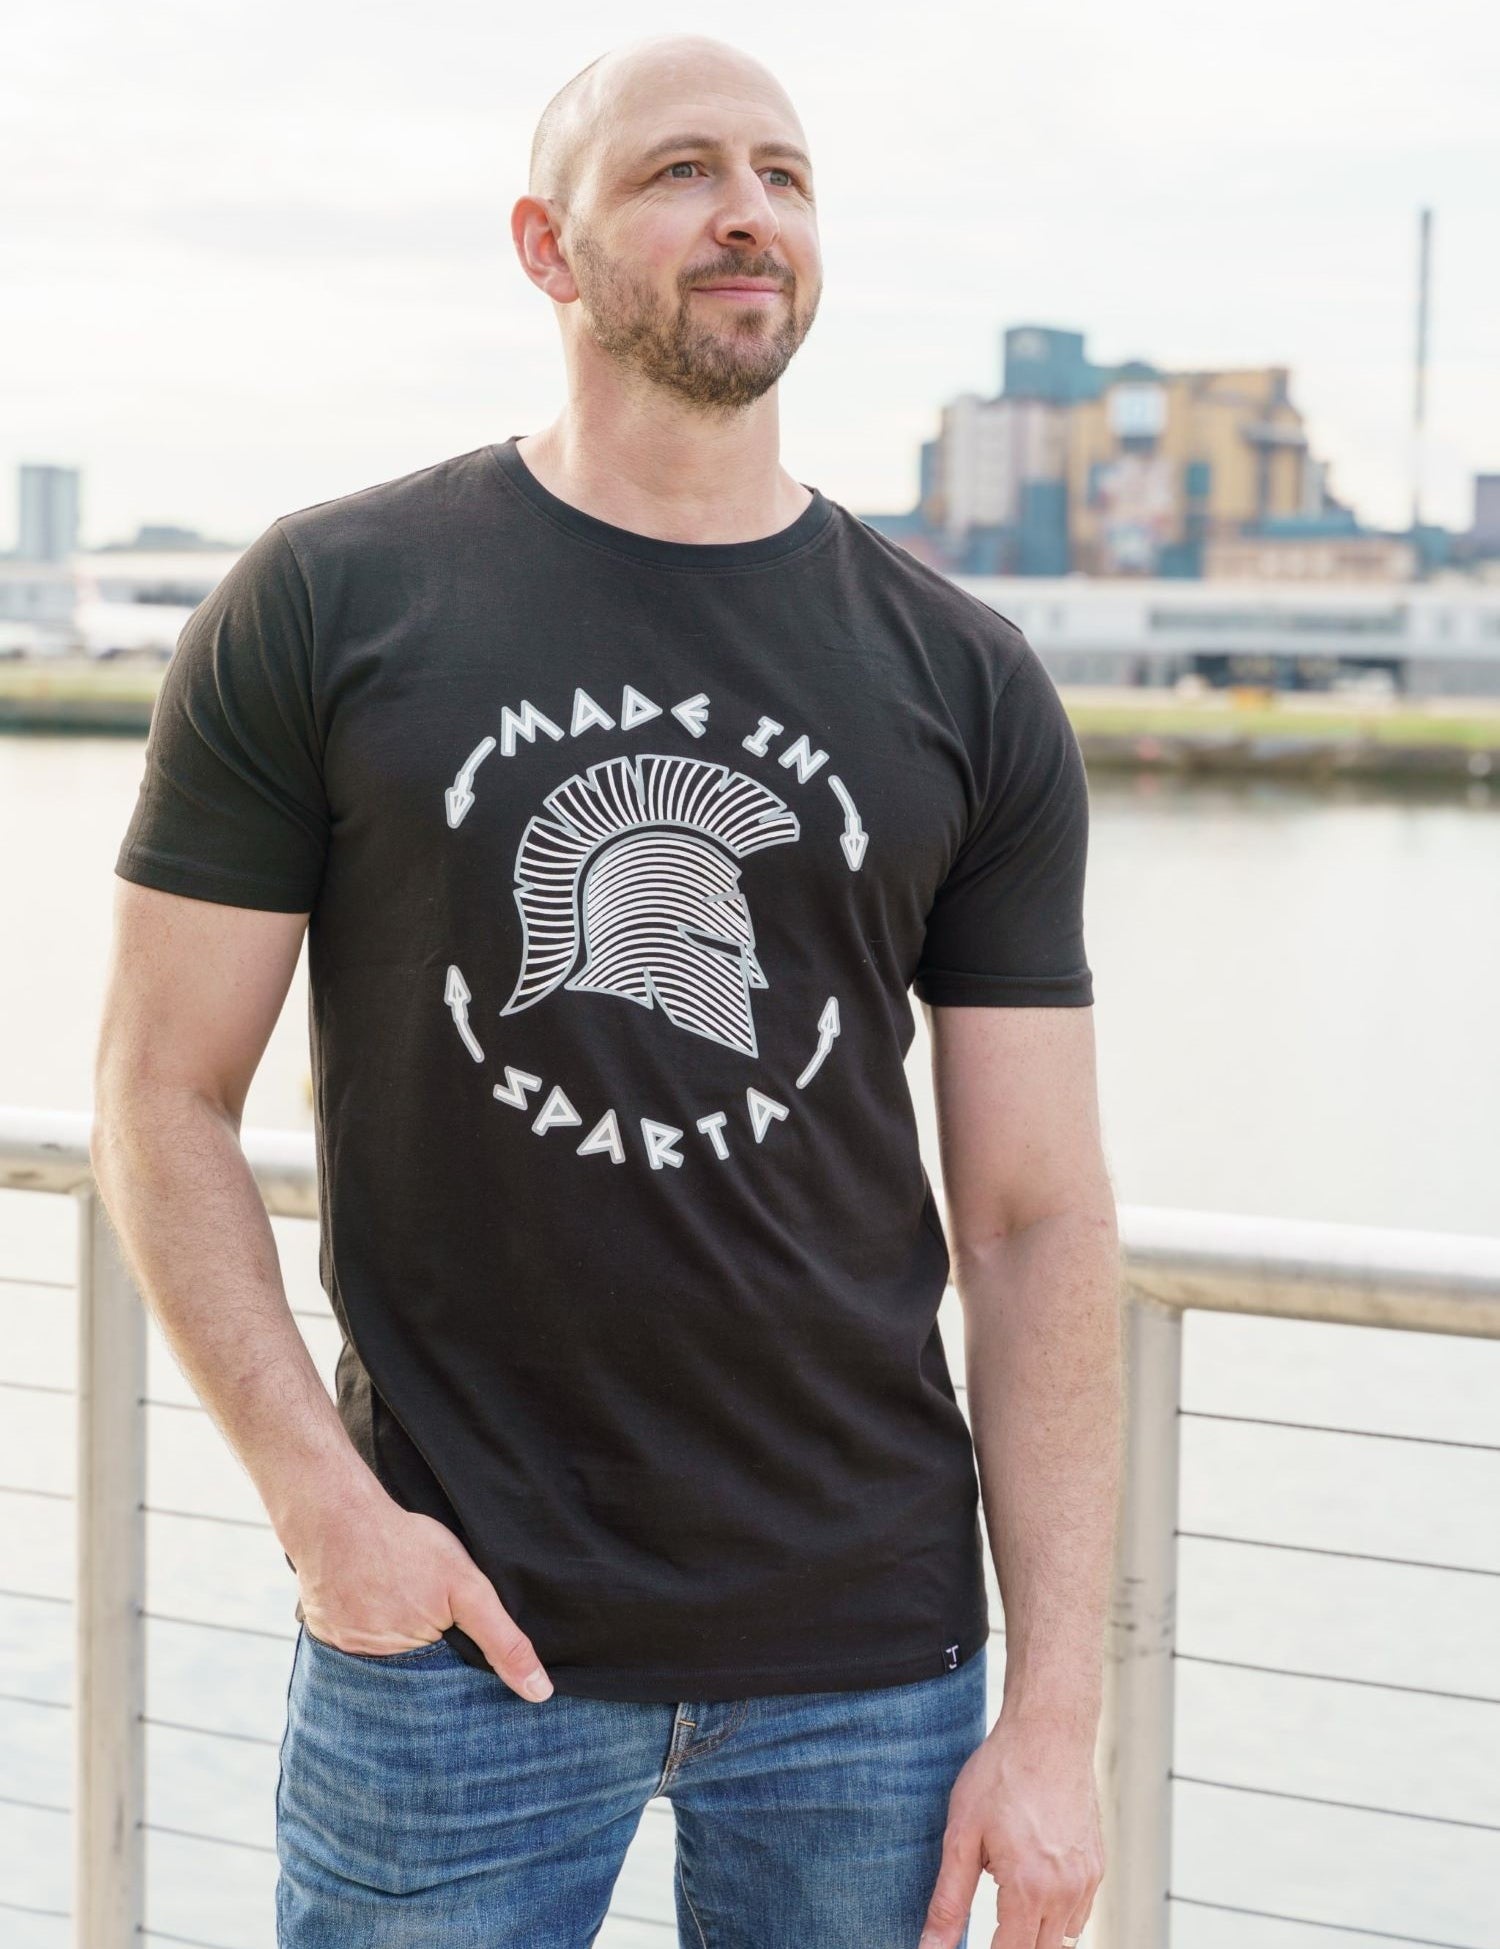 A tall and slim man standing by a canal. The smiling model is wearing a black extra long graphic t-shirt with the text made in sparta and a spartan helmet. It features a 3" longer body, 100% organic cotton, and is soft & preshrunk. This extra long tall graphic tee is ideal for tall slim men 6'2"+.